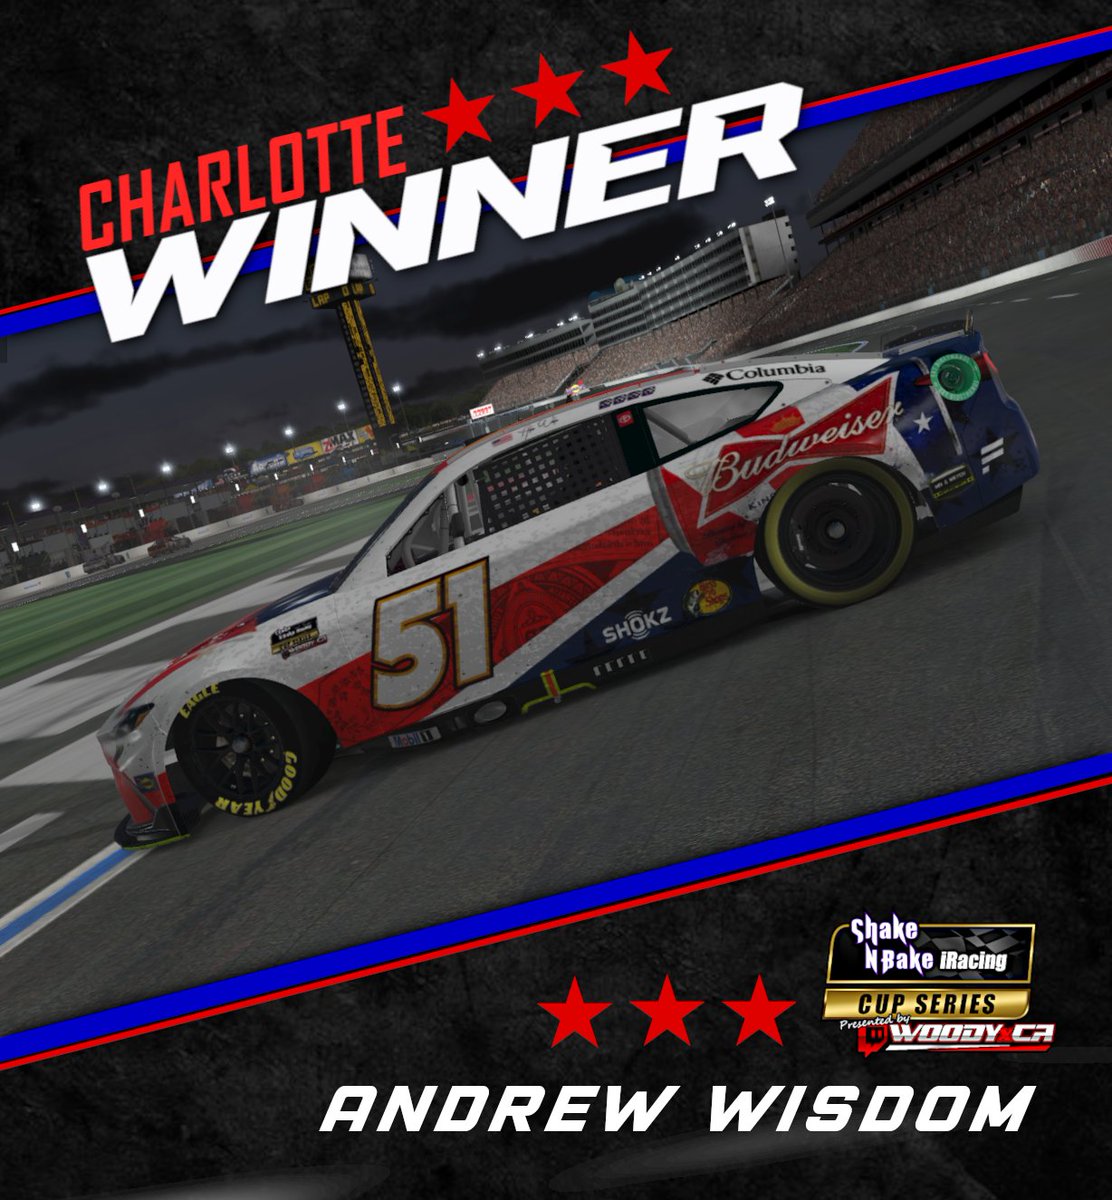 An intense battle for the win between @THarmon68 and @Wisdvmb resembled Days of Thunder for the final 20 laps, but Wisdom holds onto the lead and secures his 5th win of the season at Charlotte!